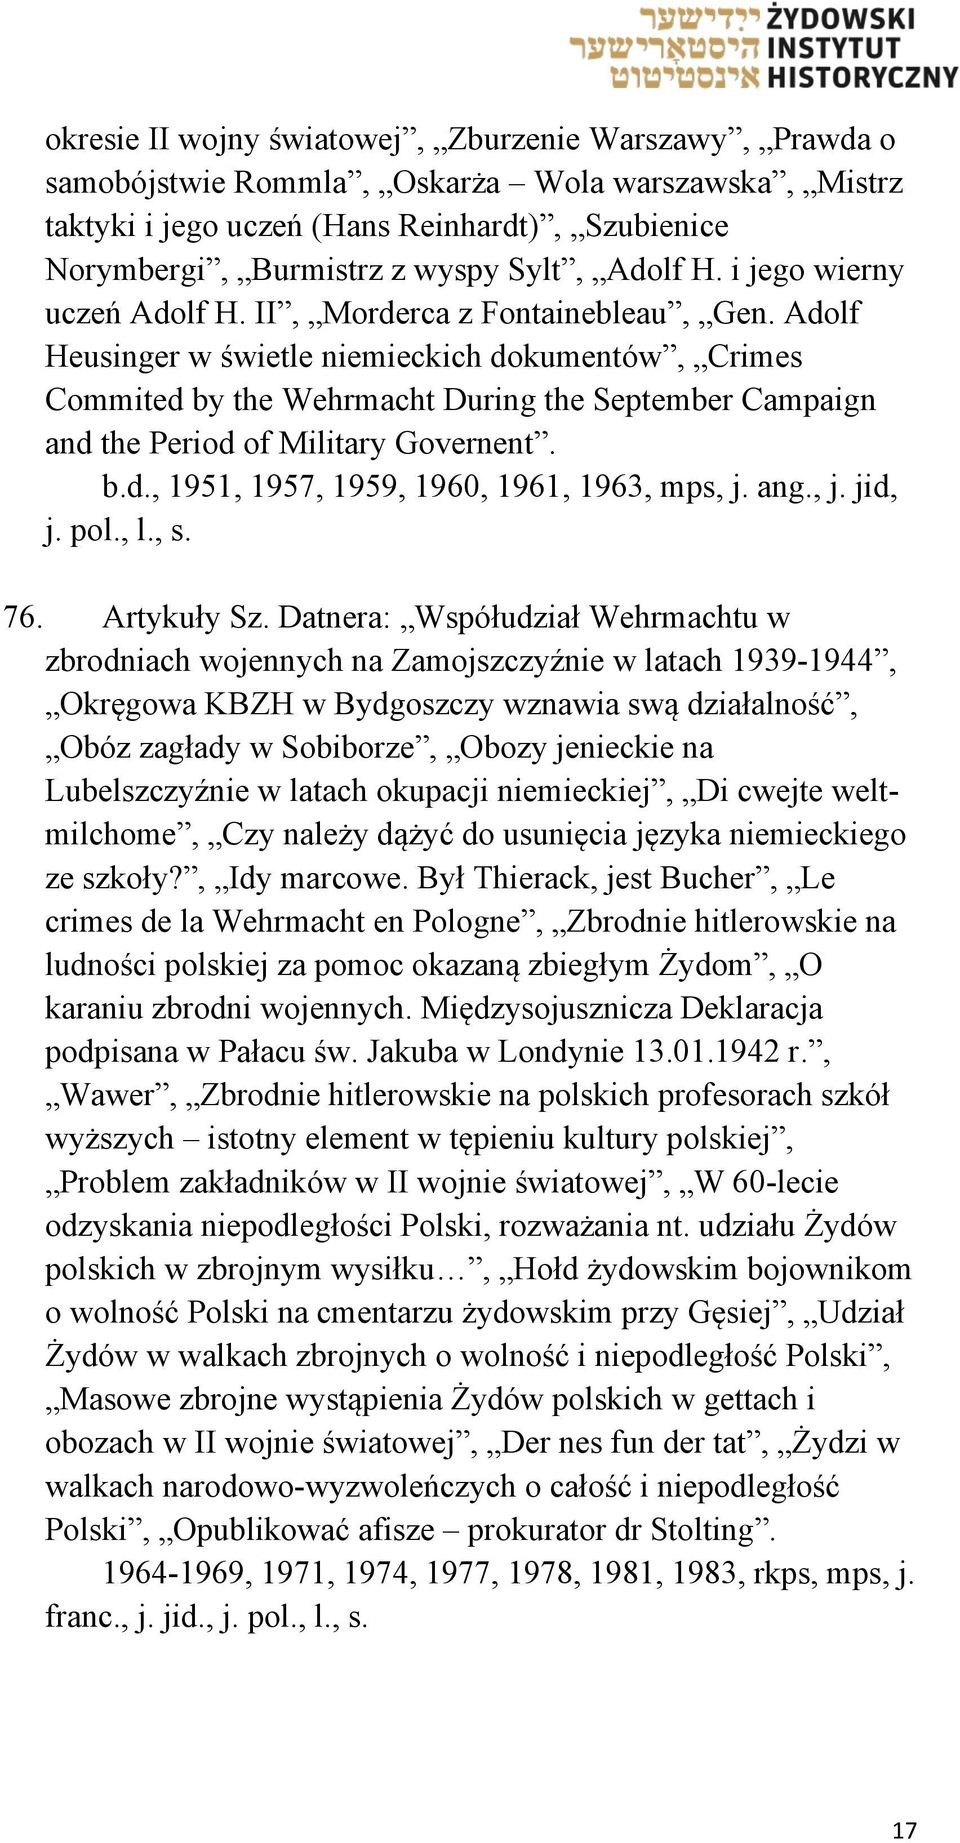 Adolf Heusinger w świetle niemieckich dokumentów, Crimes Commited by the Wehrmacht During the September Campaign and the Period of Military Governent. b.d., 1951, 1957, 1959, 1960, 1961, 1963, mps, j.